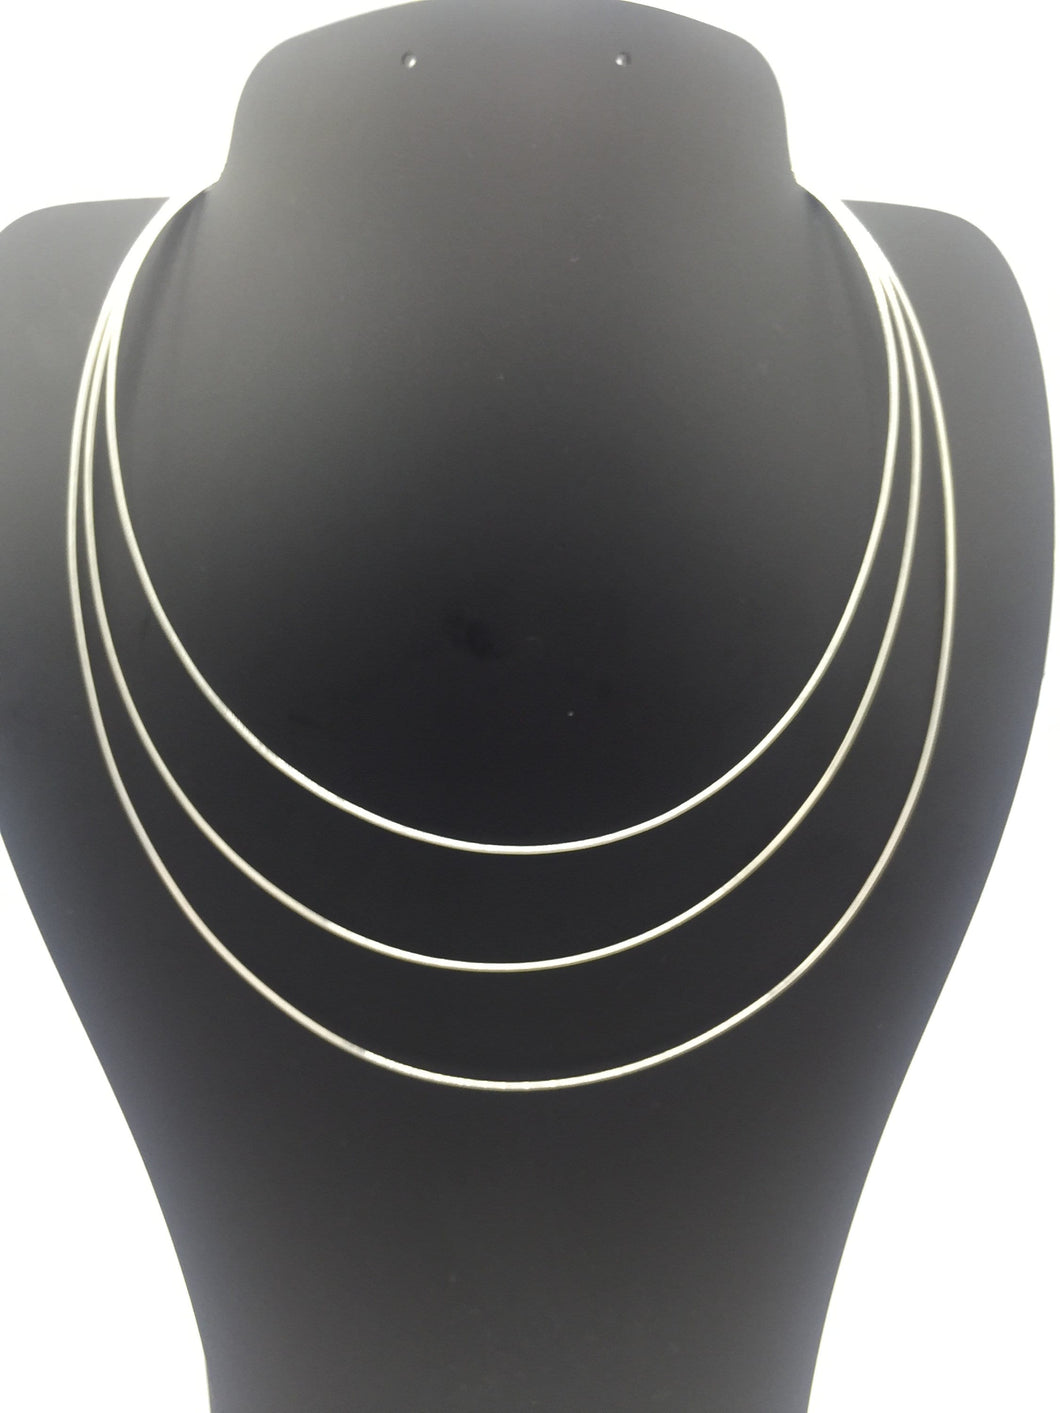 Omega chain,silver chain,sterling silver chain,925 silver chain,round omega,round omega chain